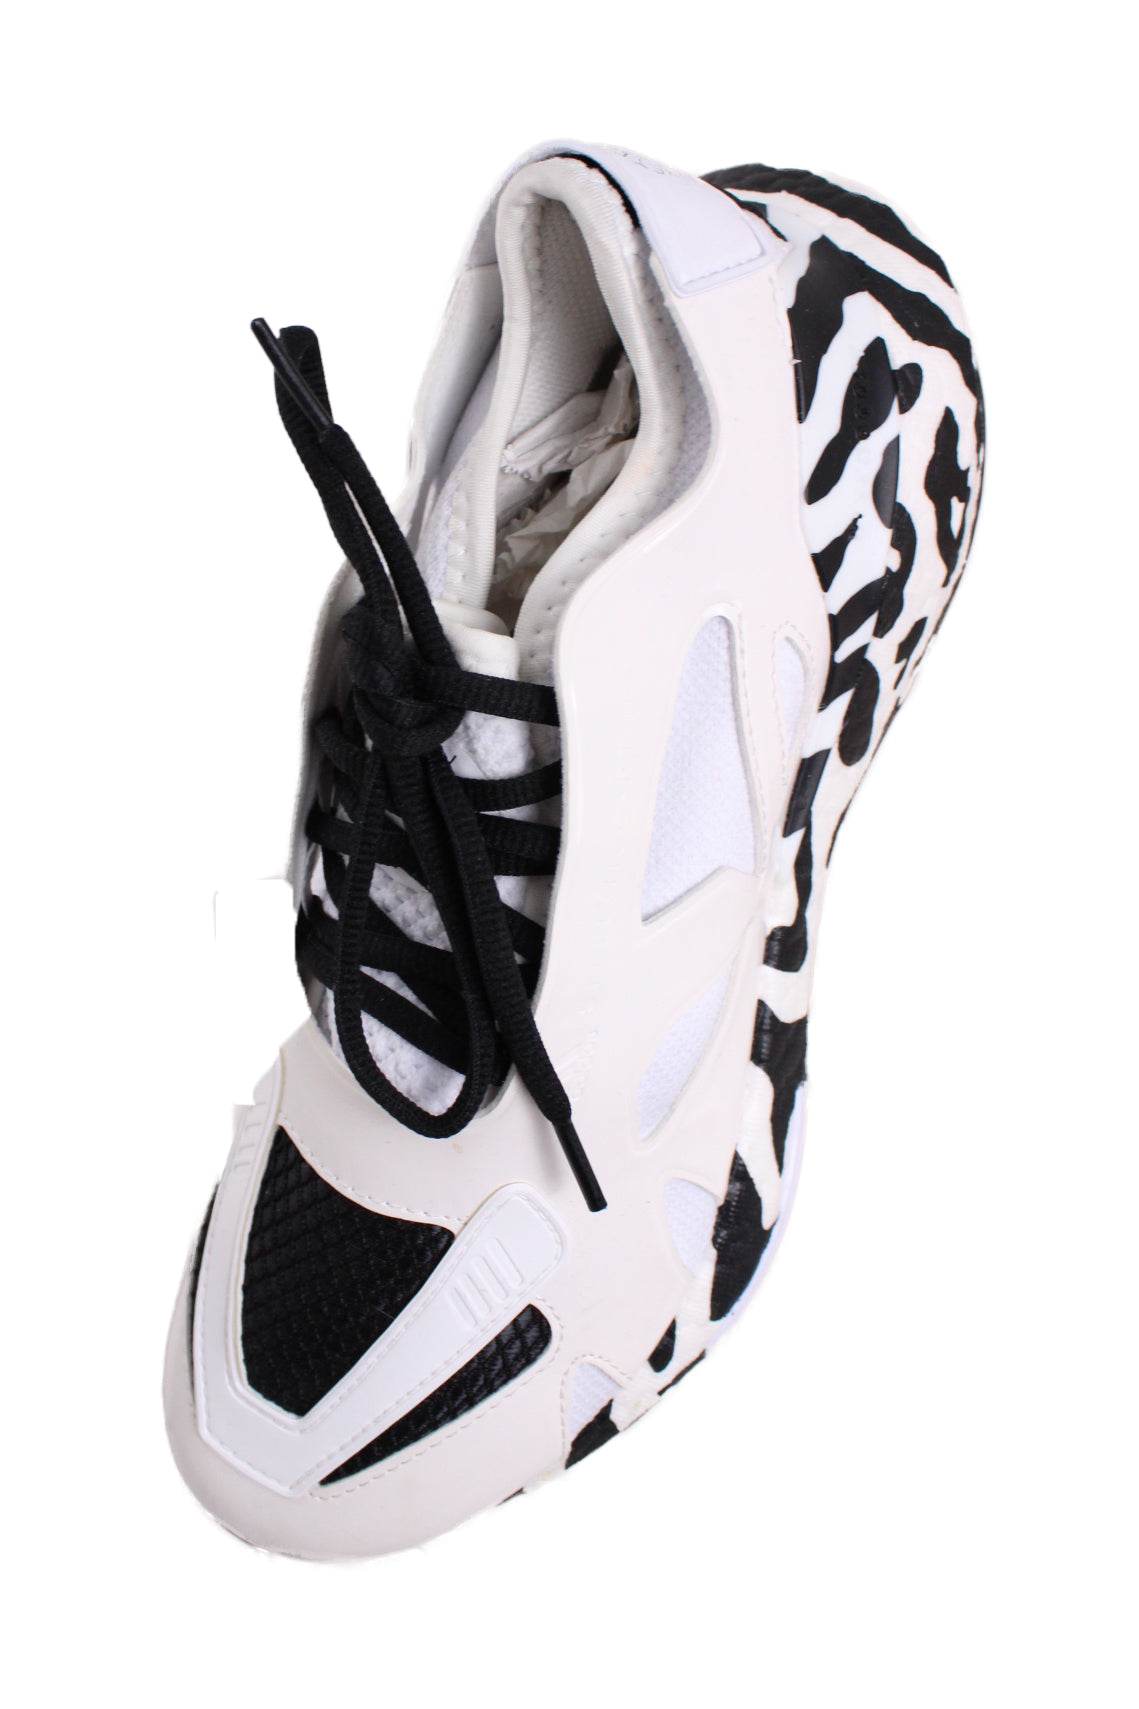 top side view with 'adidas x stella mccartney' logo debossed at sides of shoes.